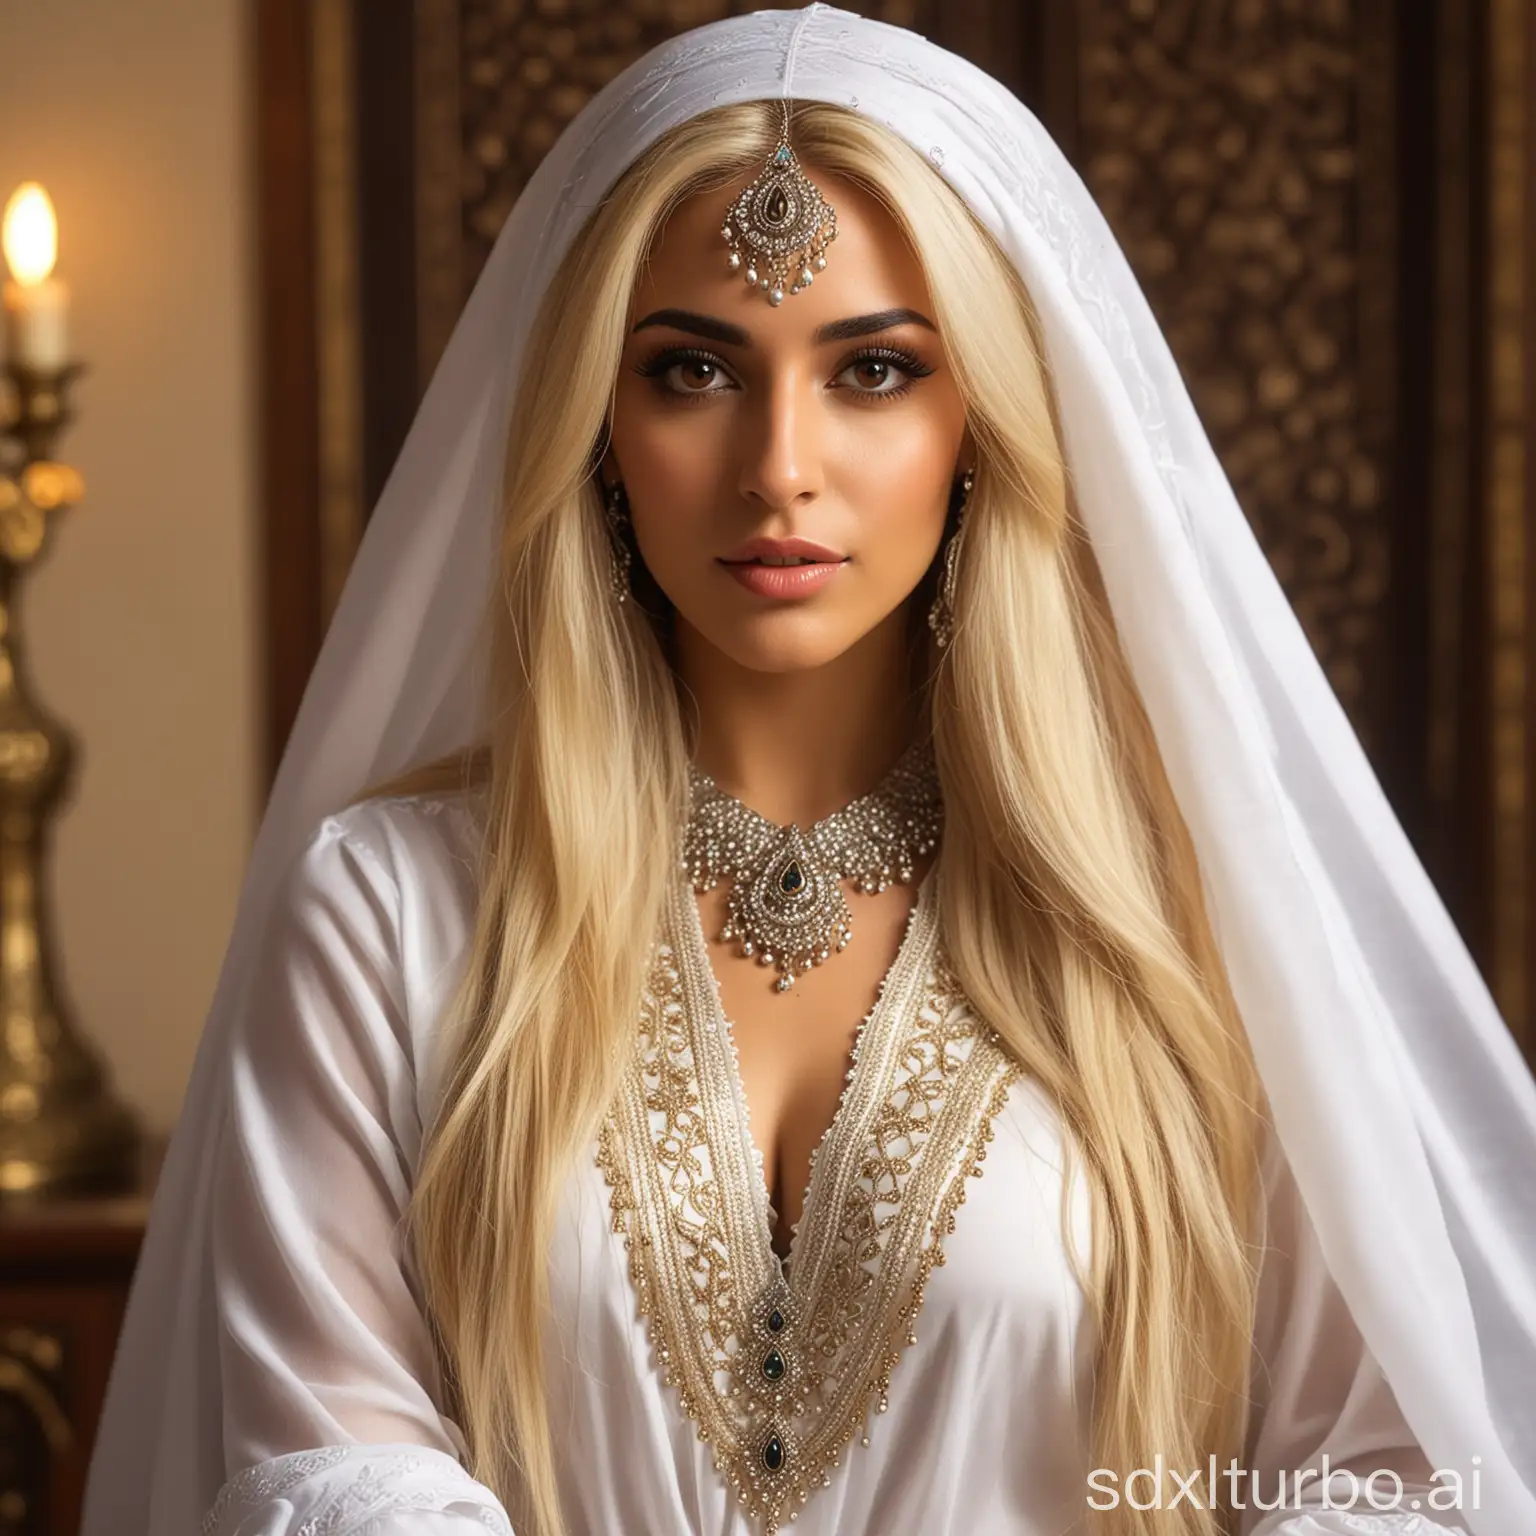 A 30 years old seductive pulchritudinous Arab sorceress with long blond hair and brown eyes, she is wearing an expensive white Bahraini farasha, she has a powerful mighty eternal magical charisma